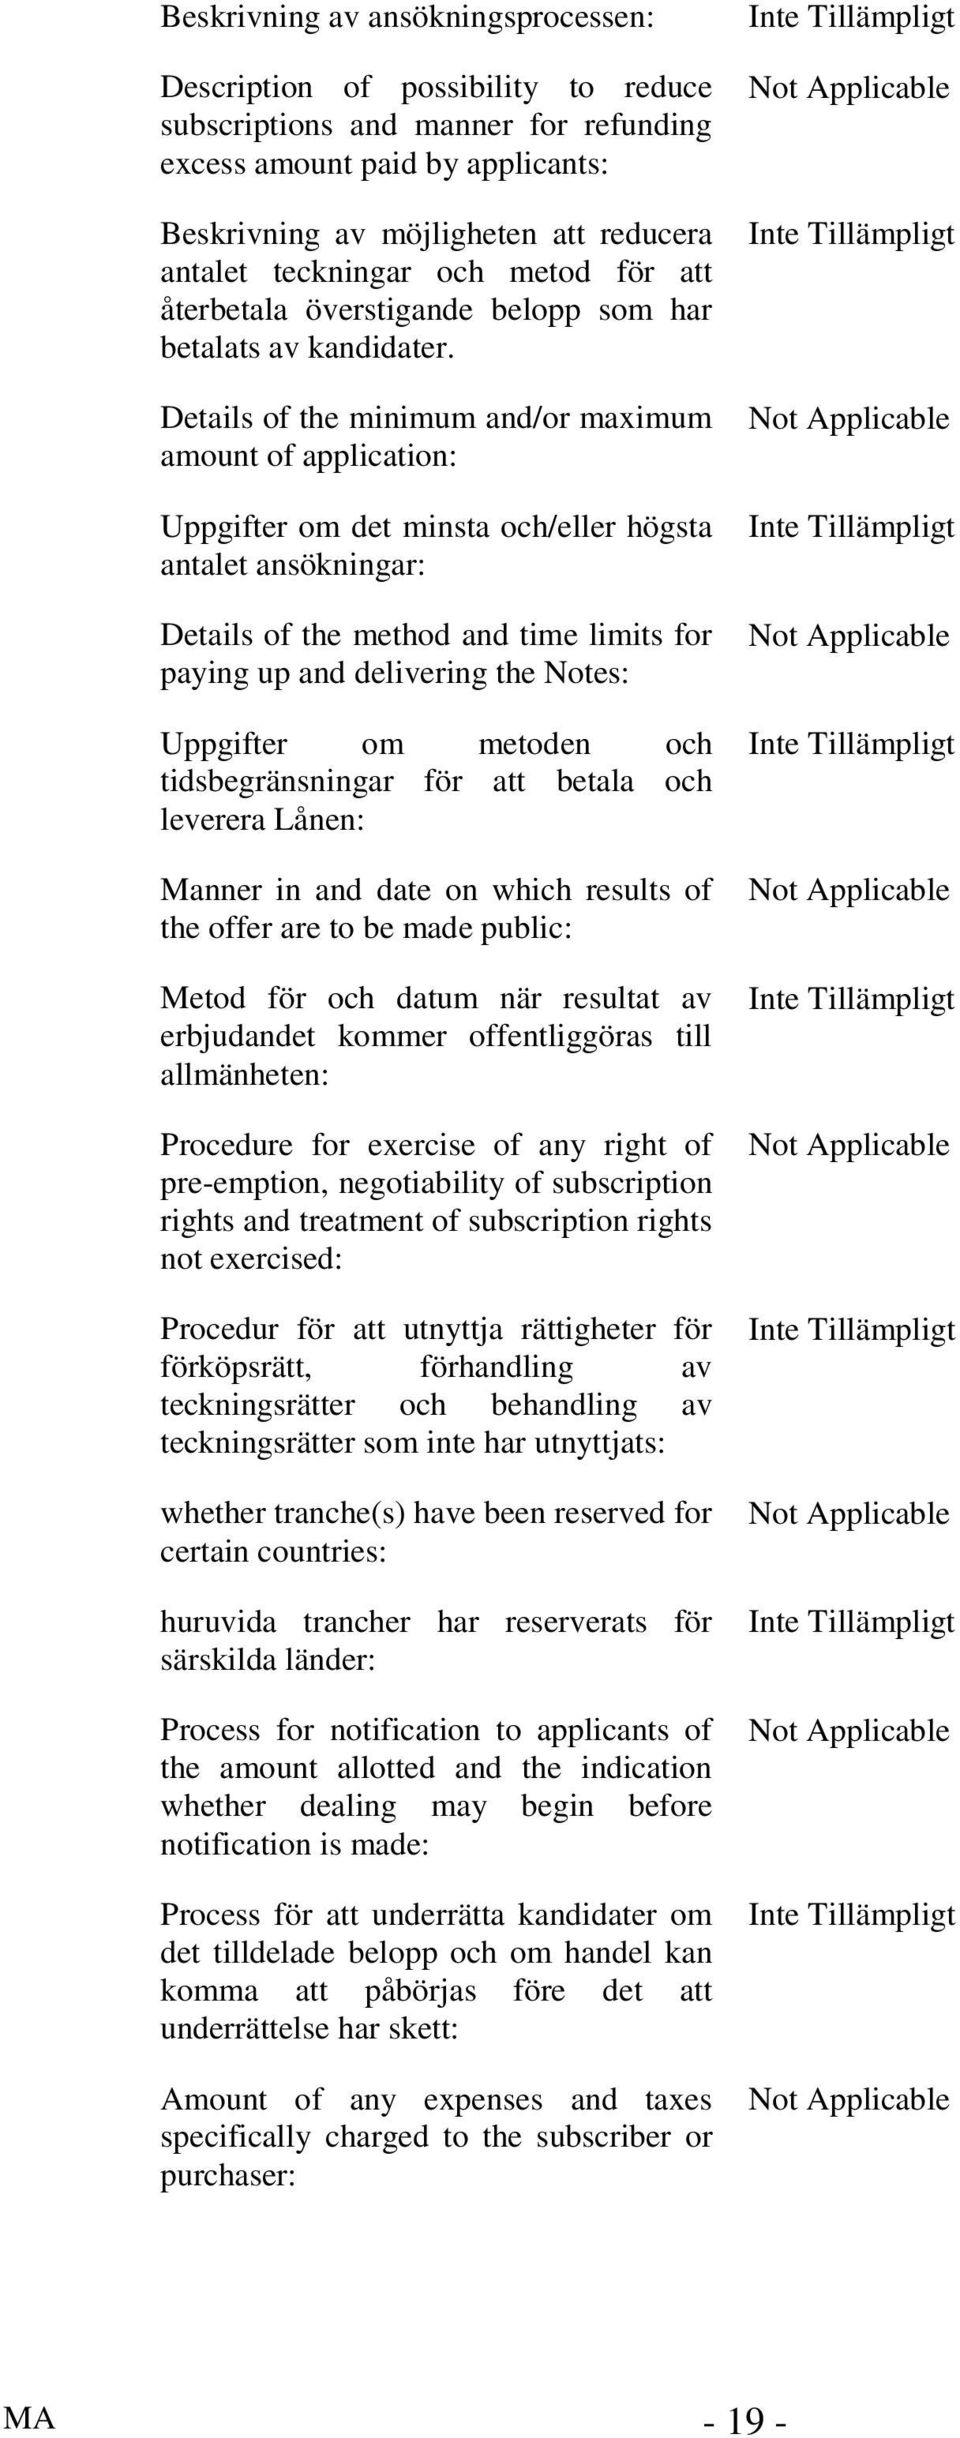 Details of the minimum and/or maximum amount of application: Uppgifter om det minsta och/eller högsta antalet ansökningar: Details of the method and time limits for paying up and delivering the